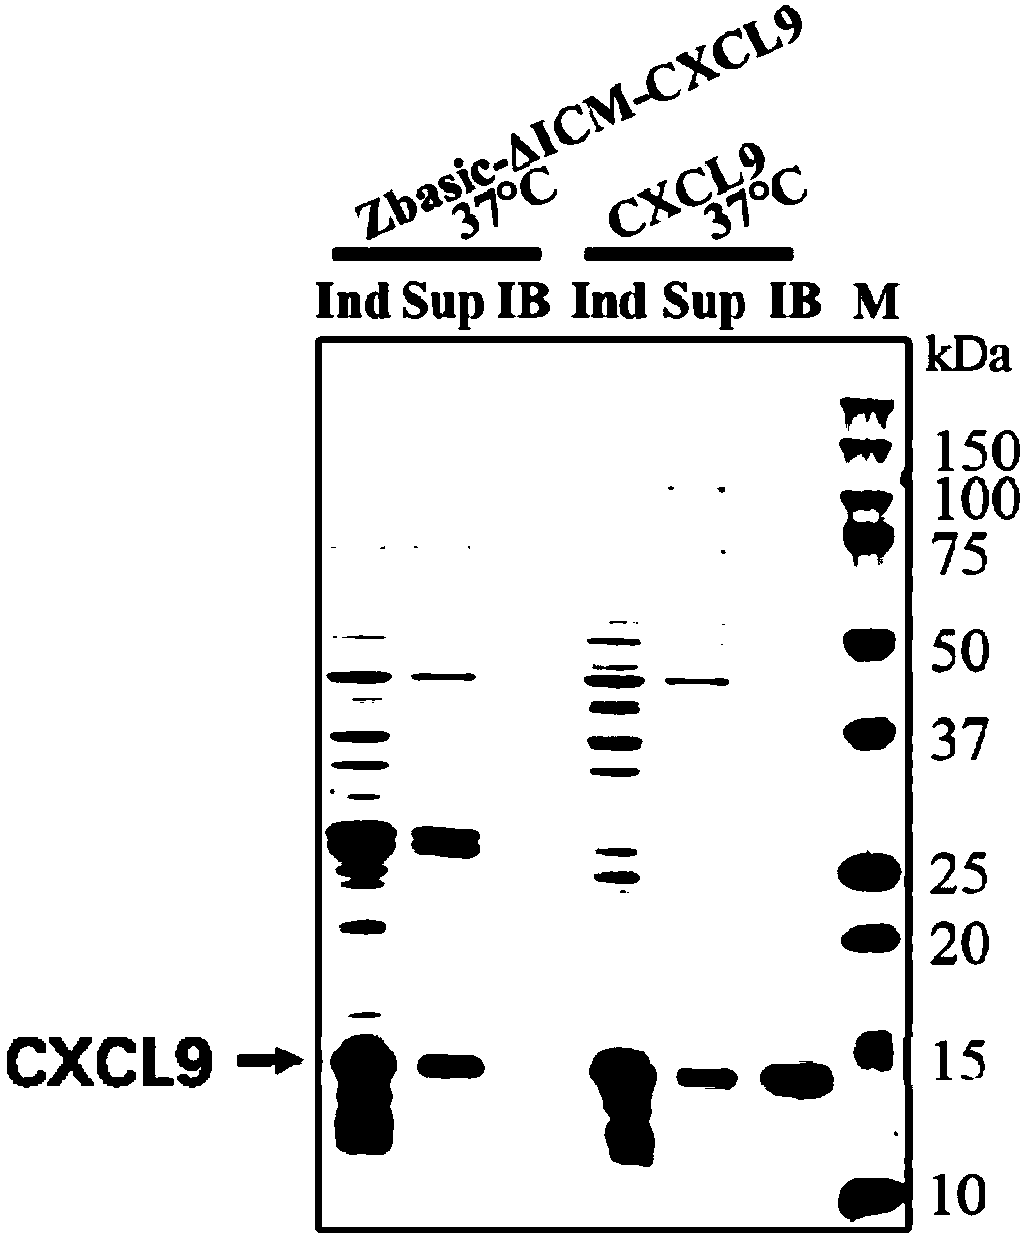 Method for expression and purification of recombinant CXCL9 (C-X-C motif chemokine 9) protein and application of method